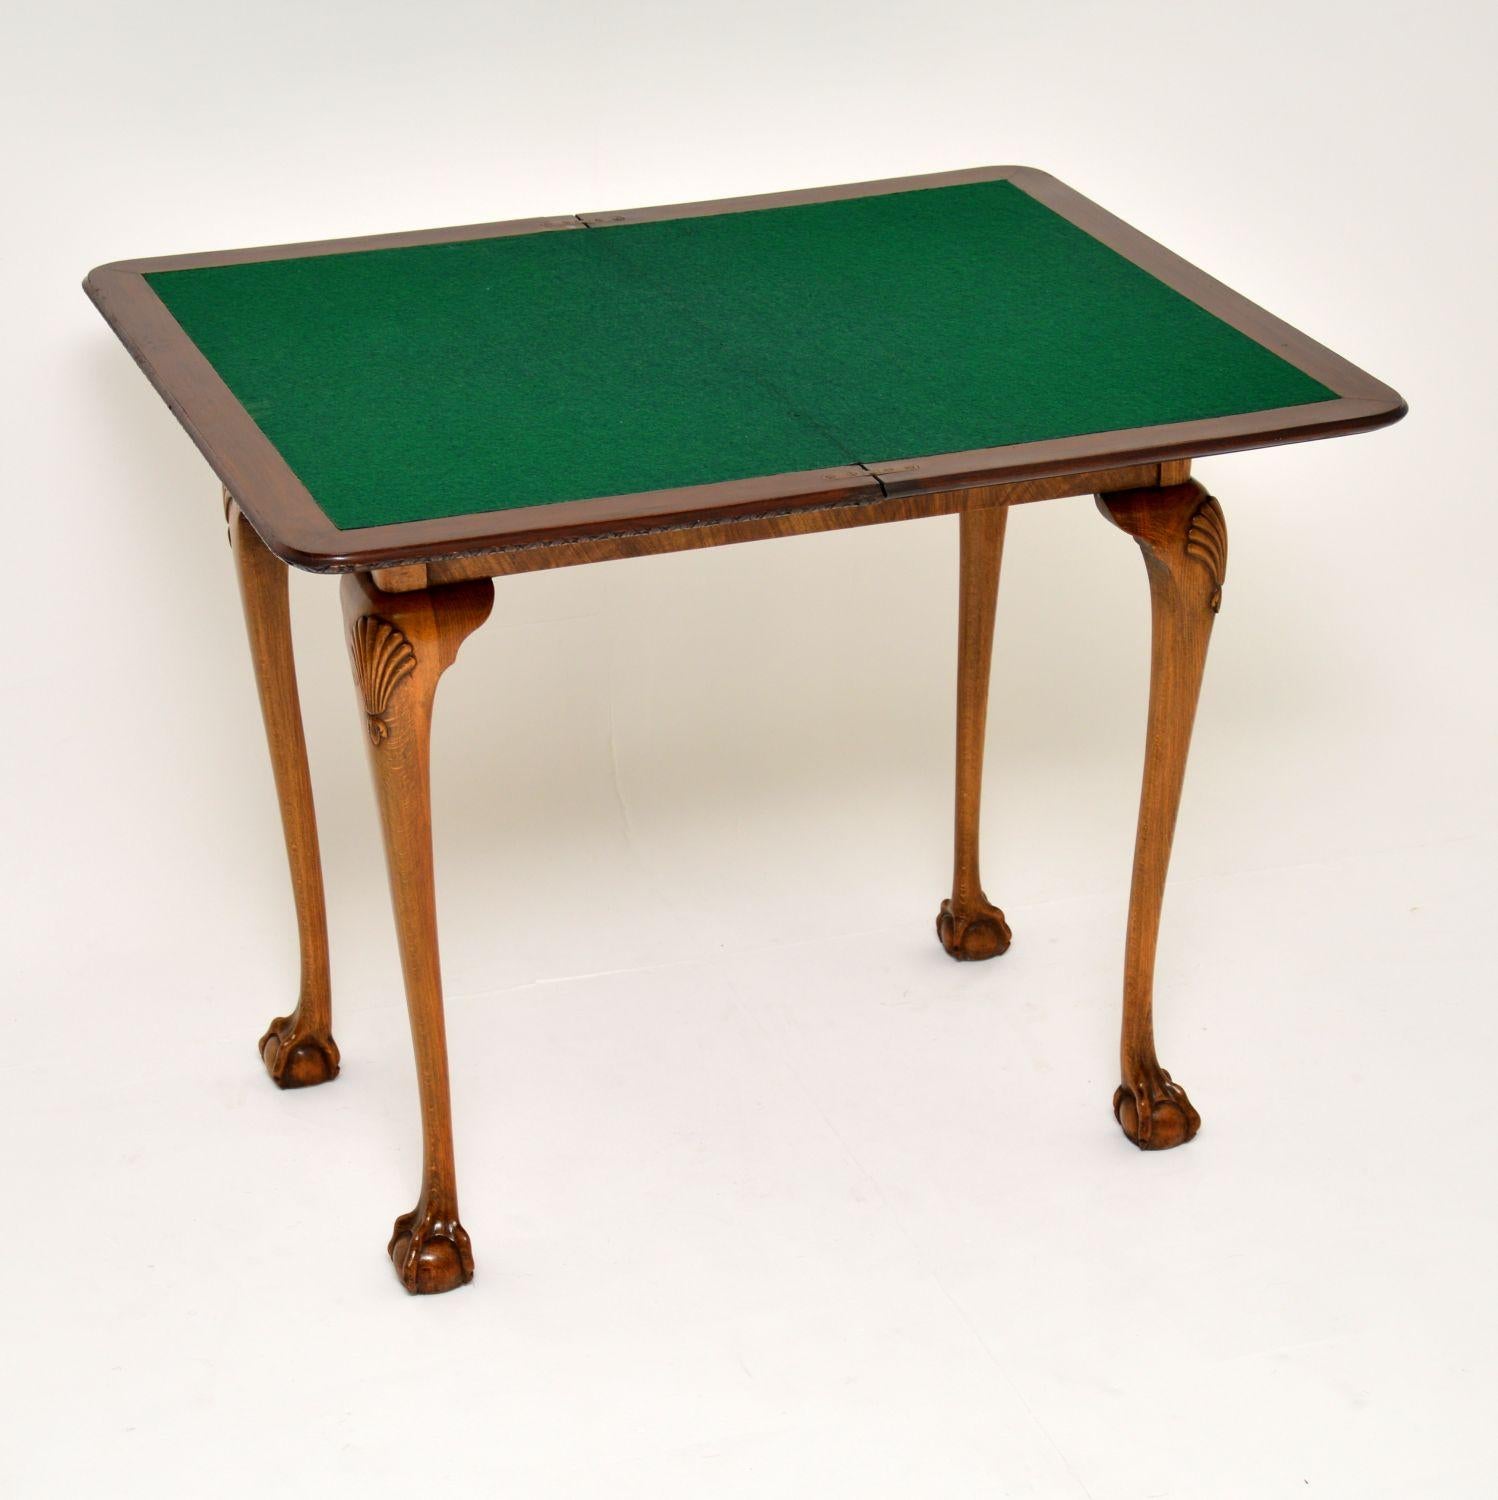 Antique Queen Anne style walnut card table in lovely condition and dating to circa 1930s period.

It has a beautifully patterned burr walnut top with a carved edge, which rotates & opens up to reveal a baize lined playing surface. There is a